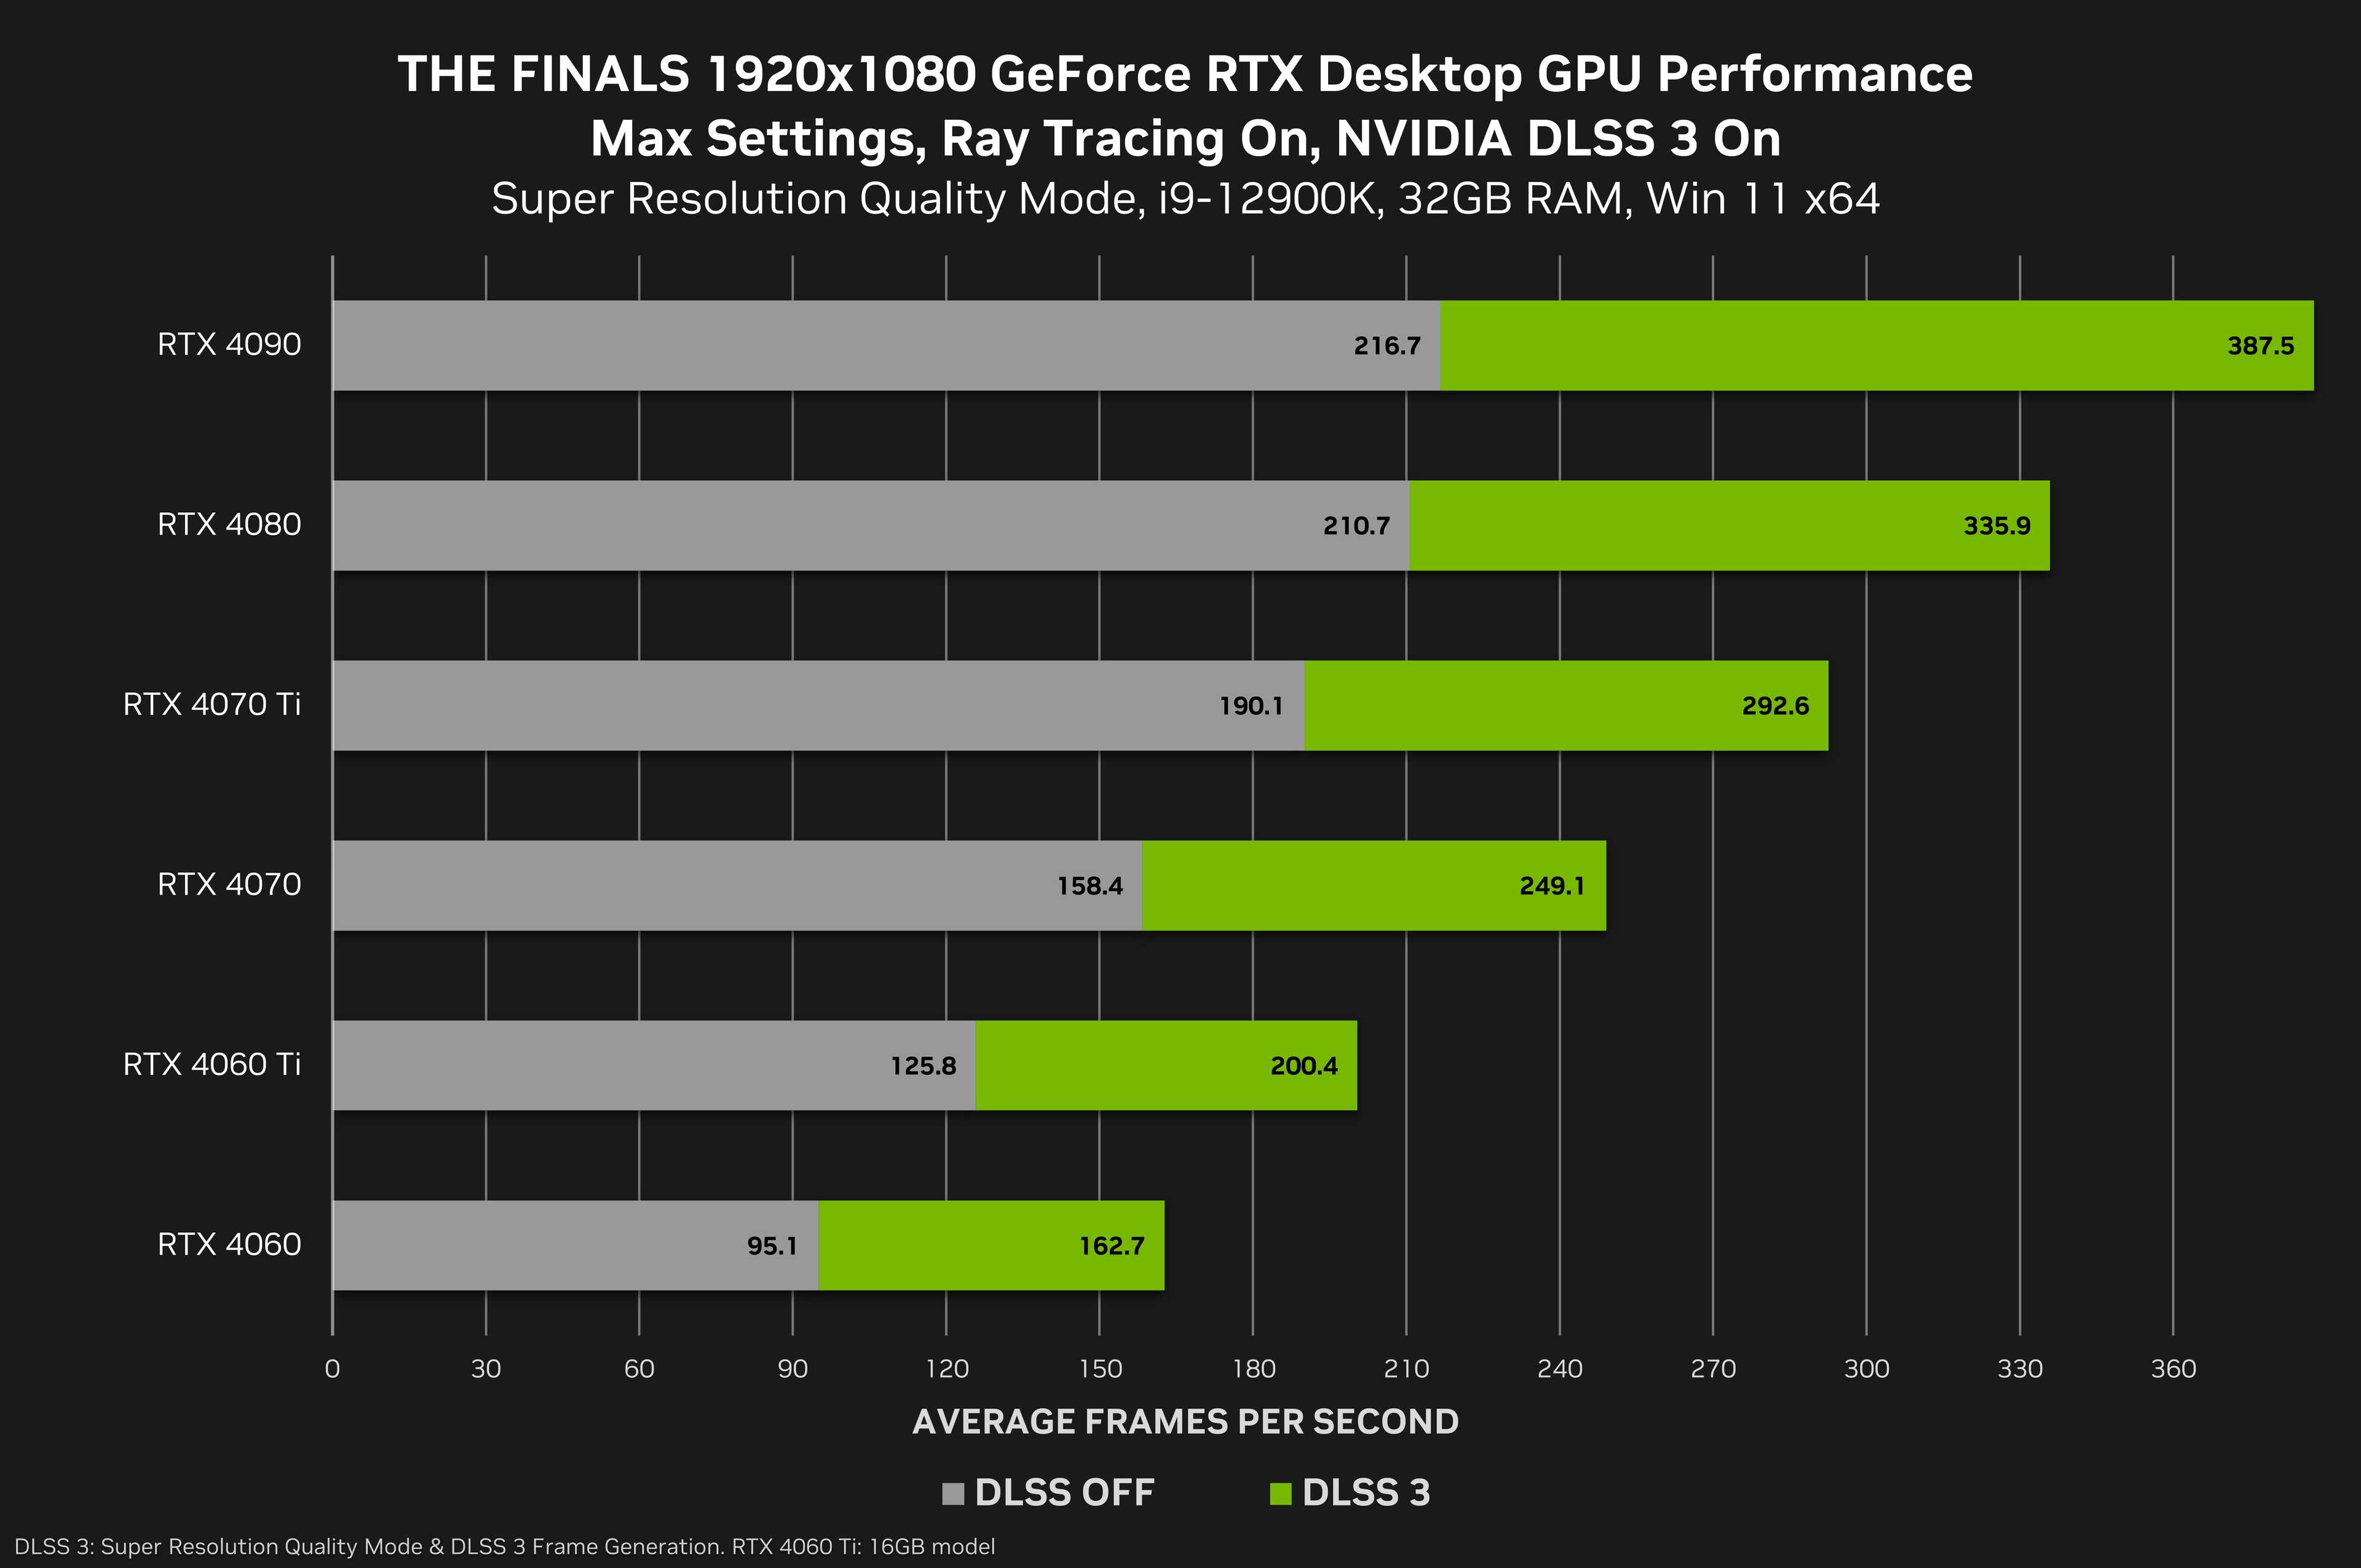 The finals 1080p benchmarks